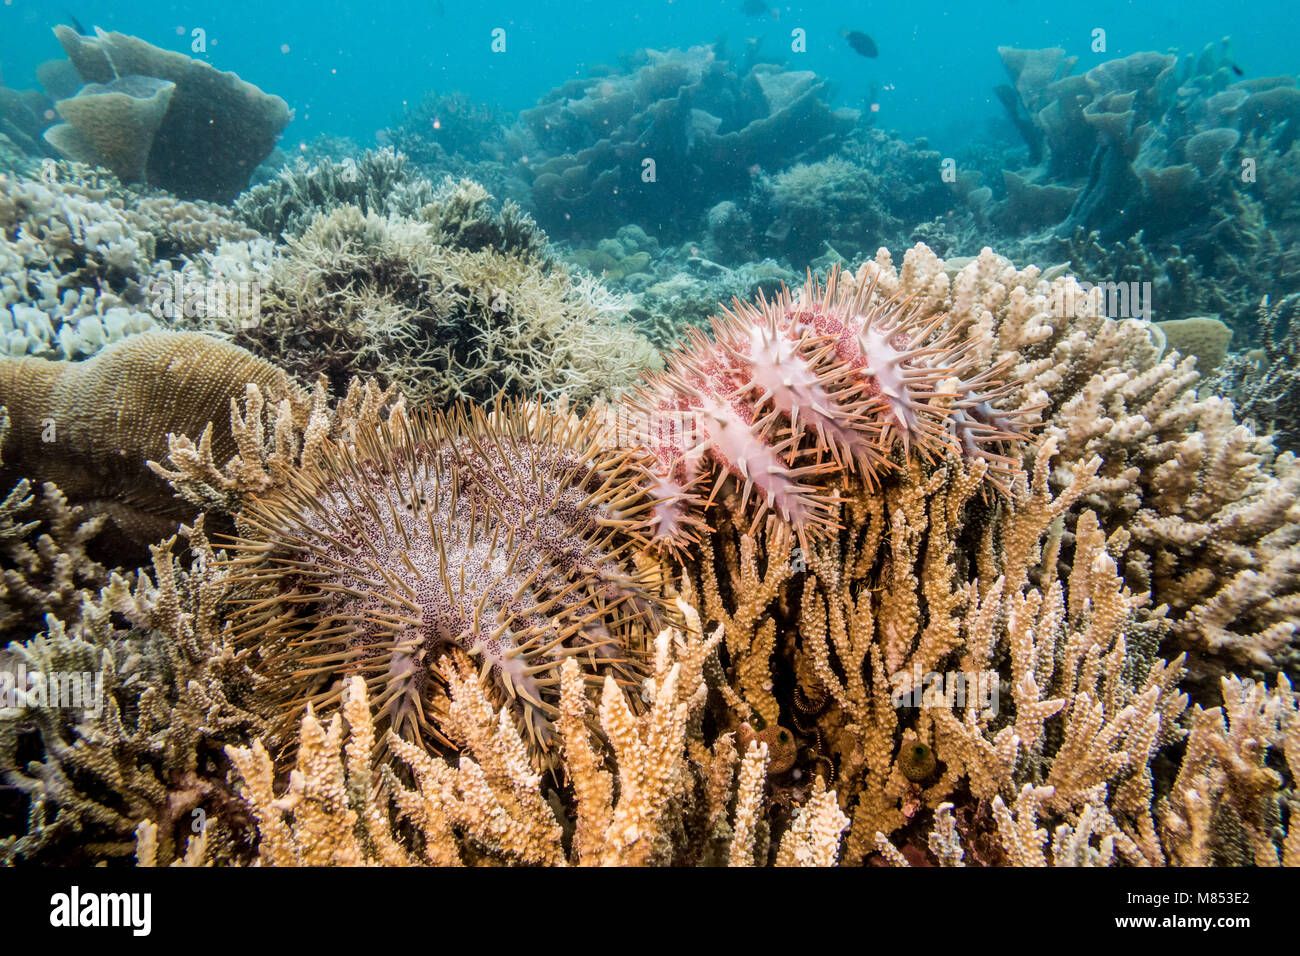 A Crown of Thorns Starfish cull carried out by volunteers ar TRACC (Tropical Research And Conservation Centre) in Sabah, Malaysia. This invasive speci Stock Photo